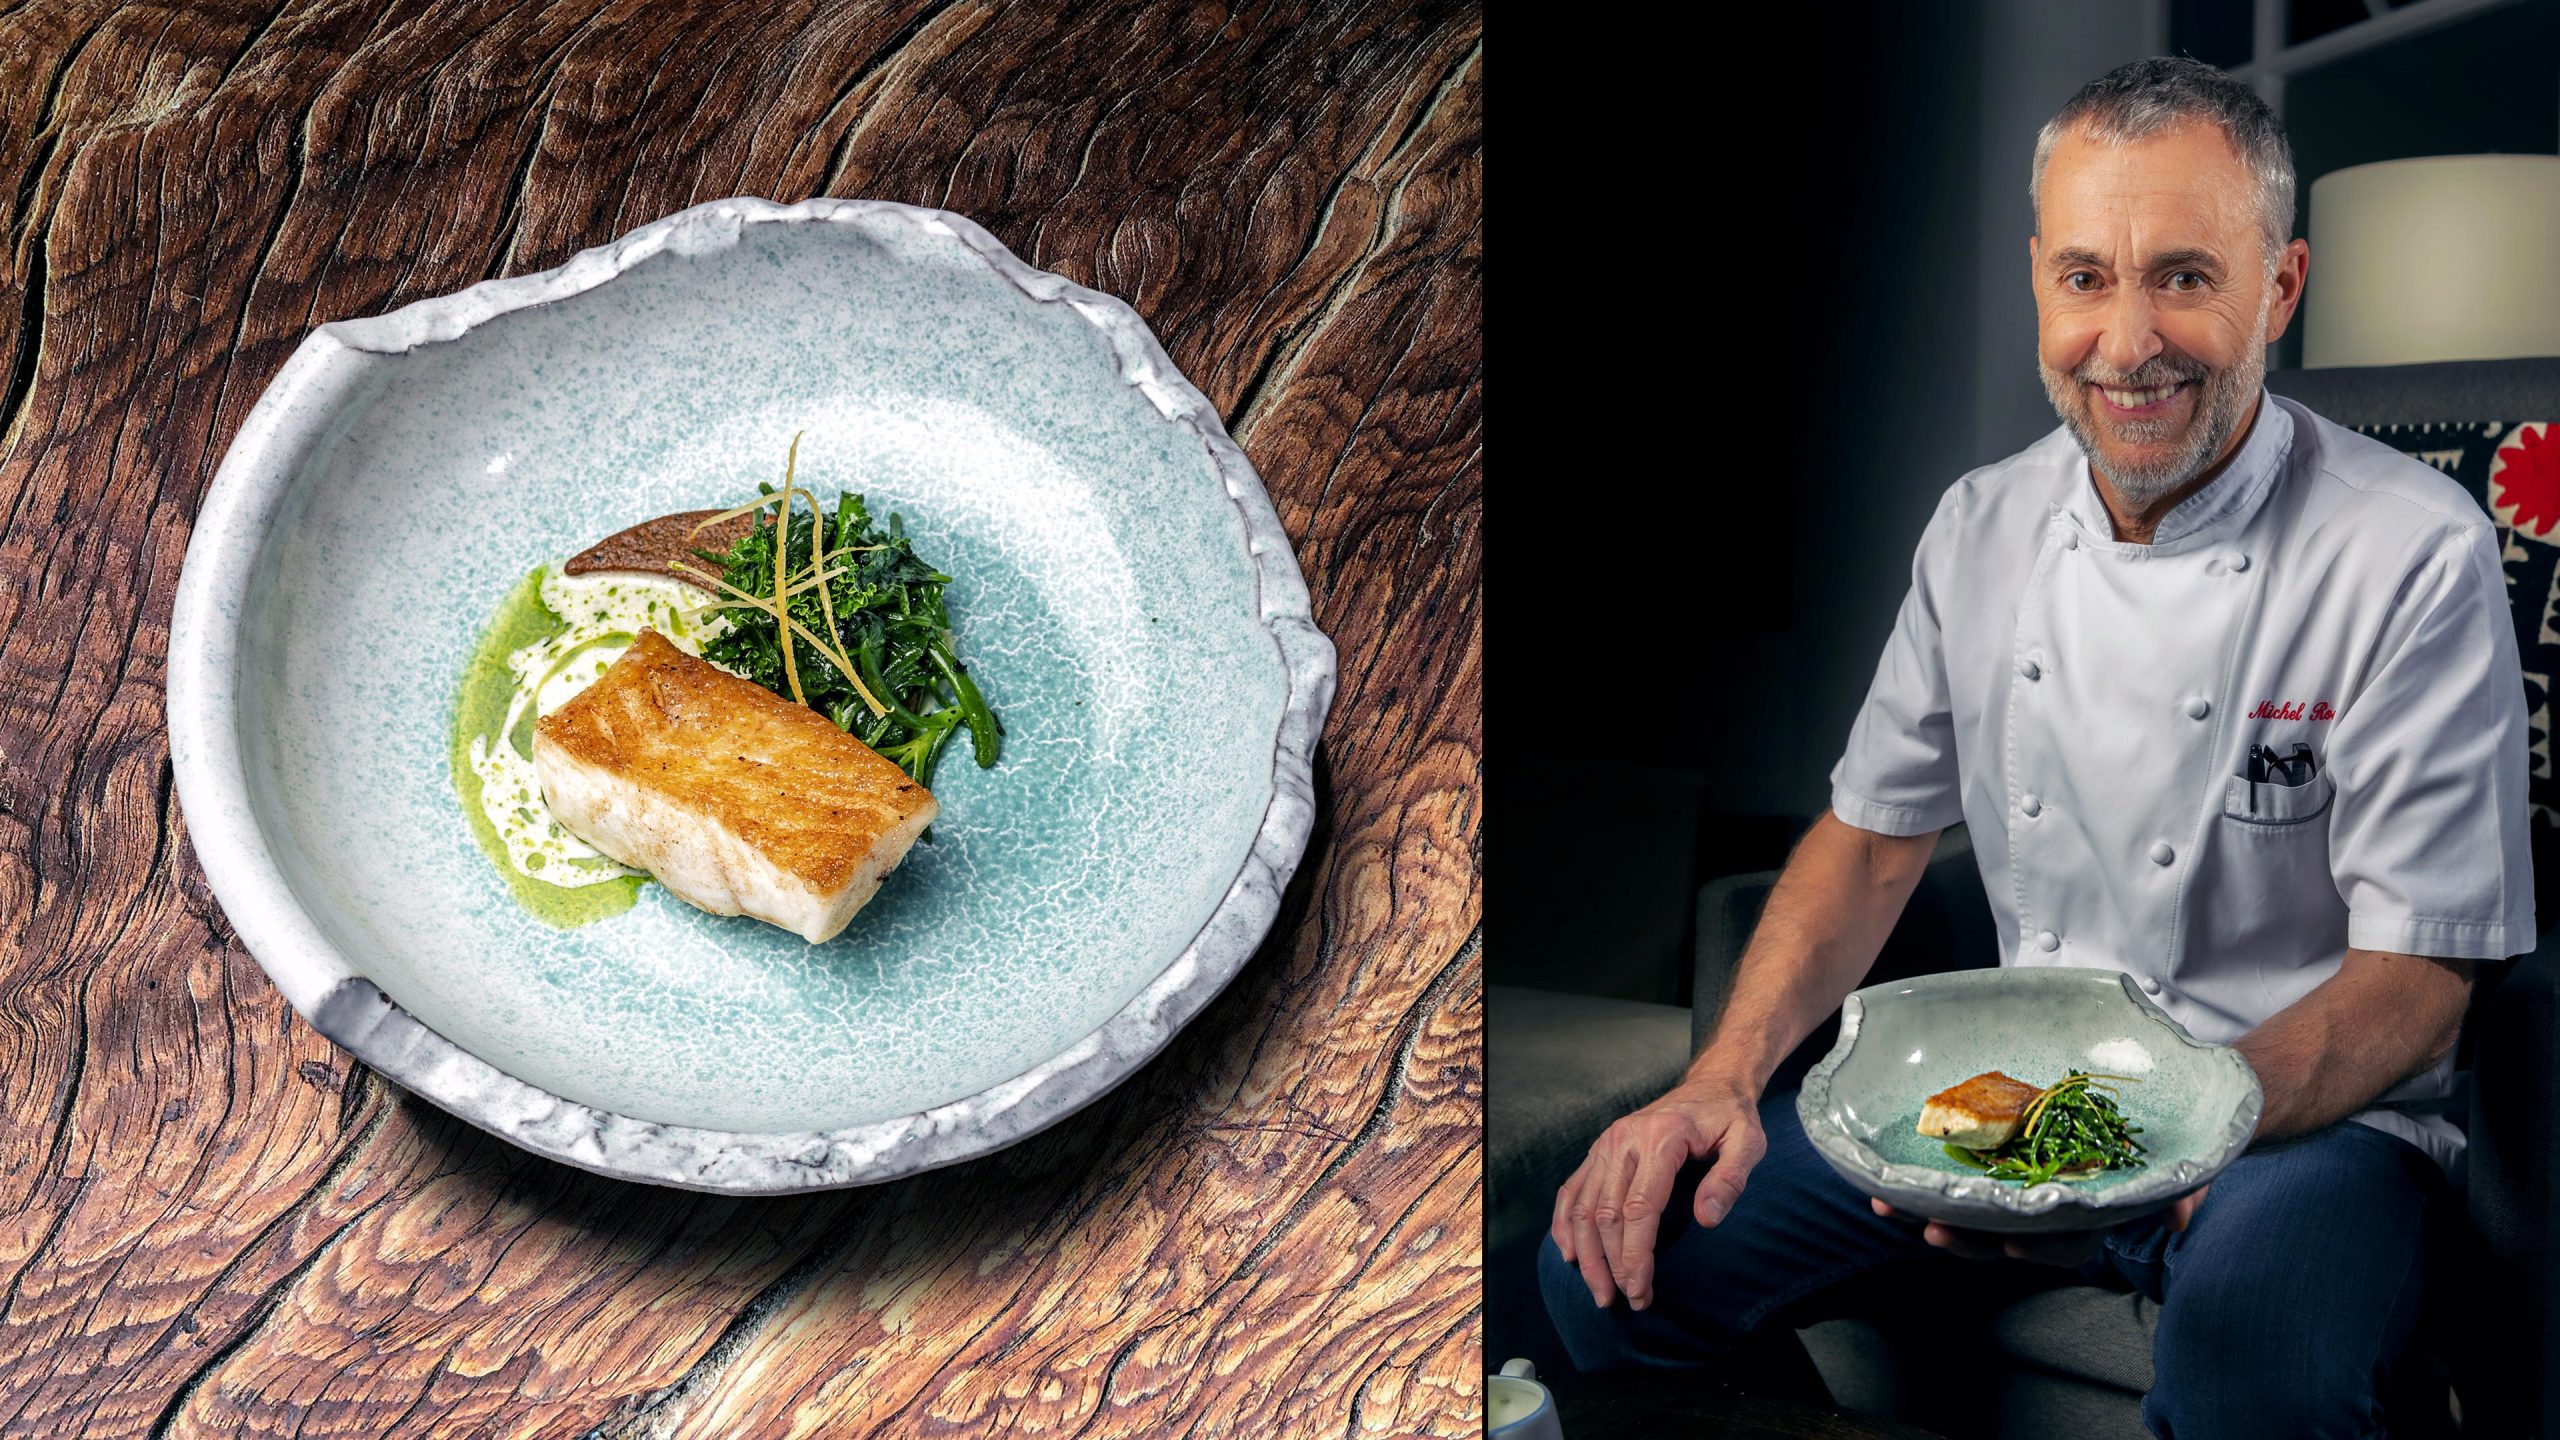 A portrait of the famous chef Michel Roux, sitting and holding one of his signature dishes, a fish dish presented on a beautiful blue plate. The image is divided in half: one side features a product shot (food photography) of his dish, while the other side showcases the portrait of the chef.